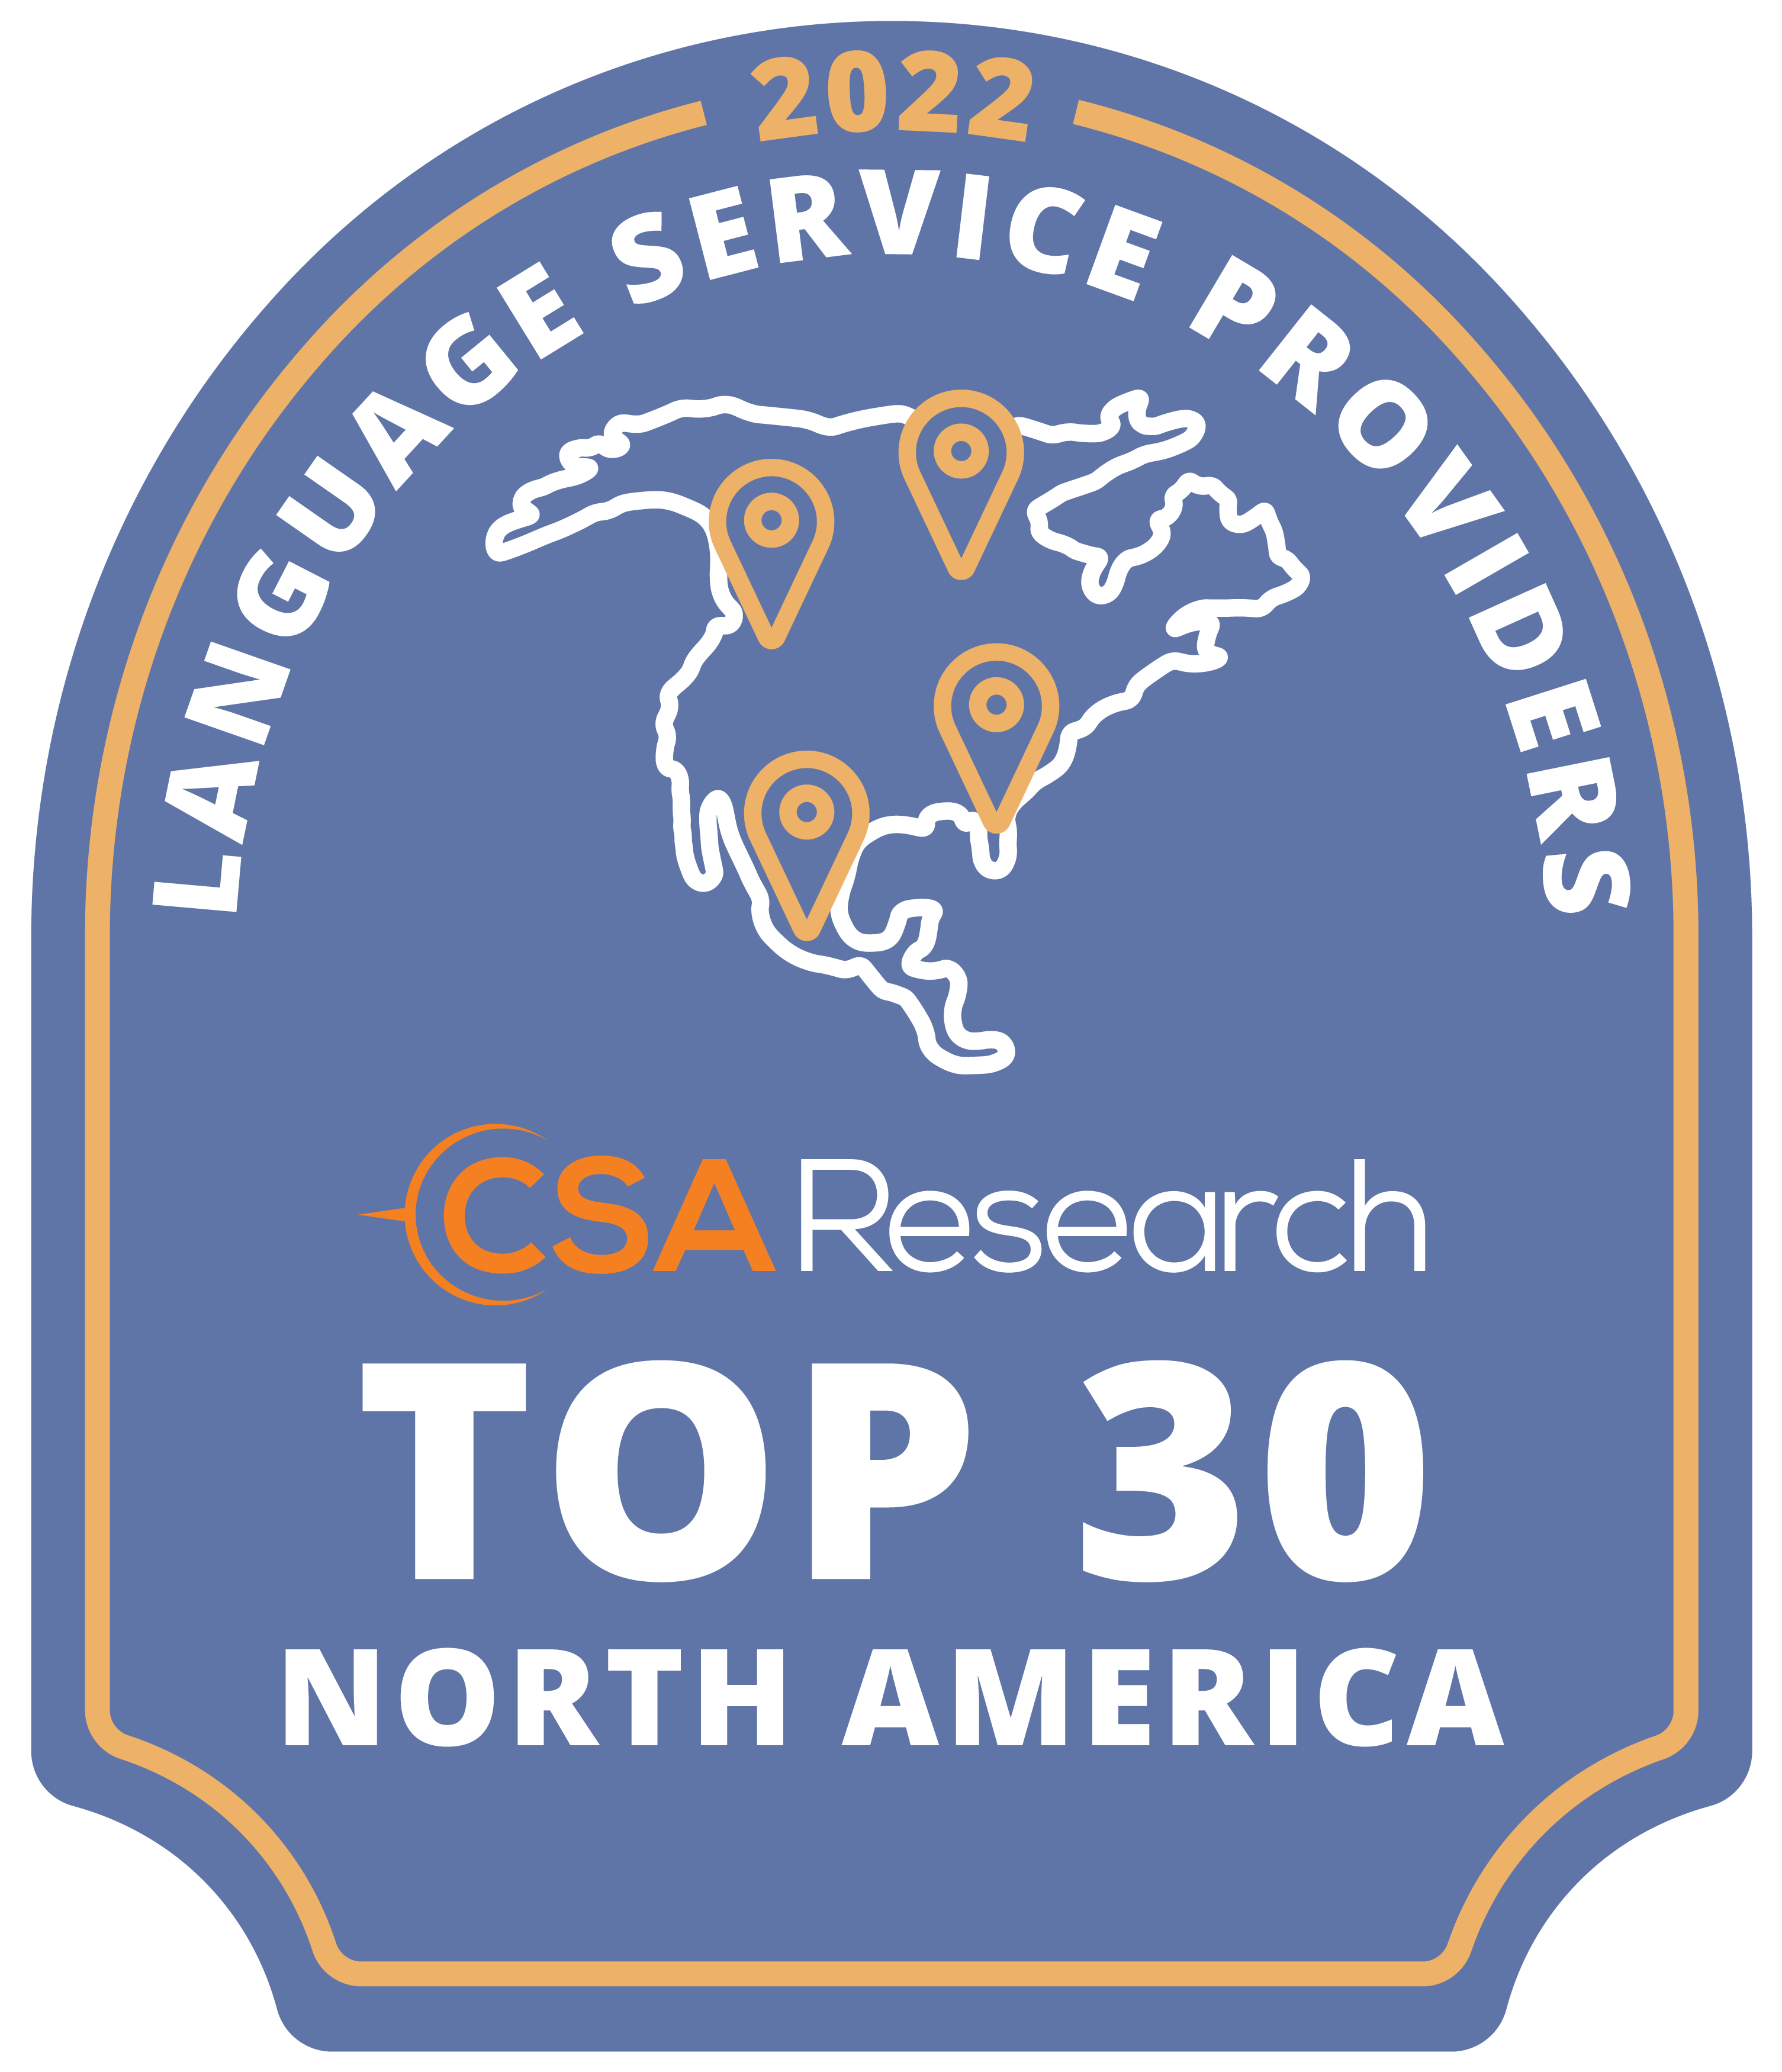 Language Network Places Top 30 in Language Service Companies in North America